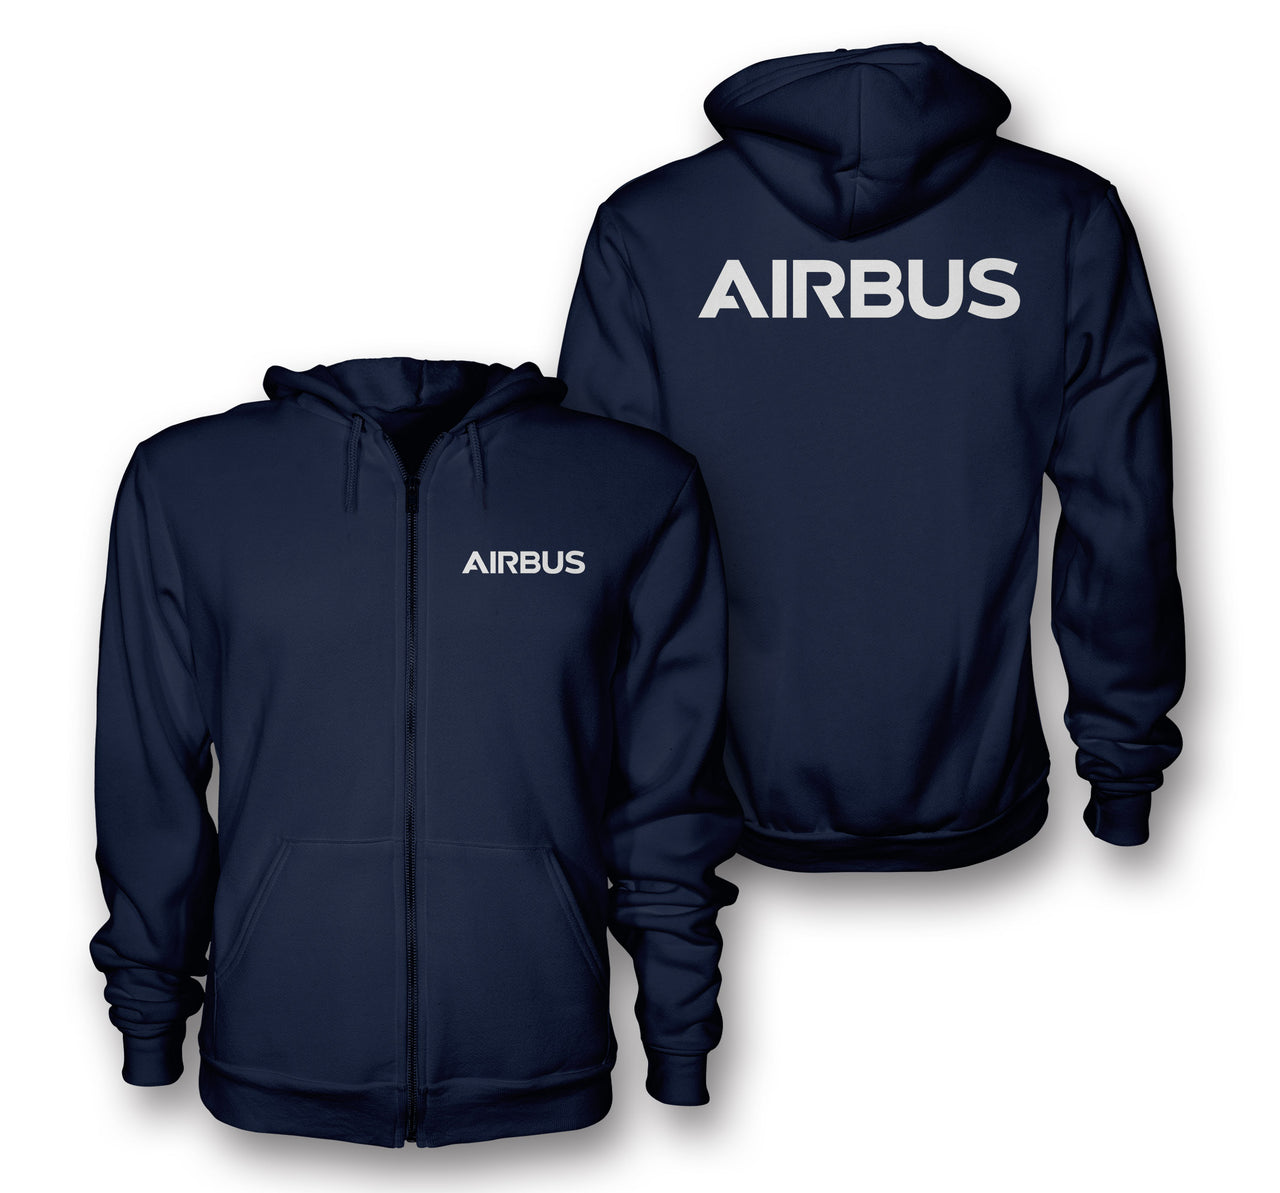 Airbus & Text Designed Zipped Hoodies